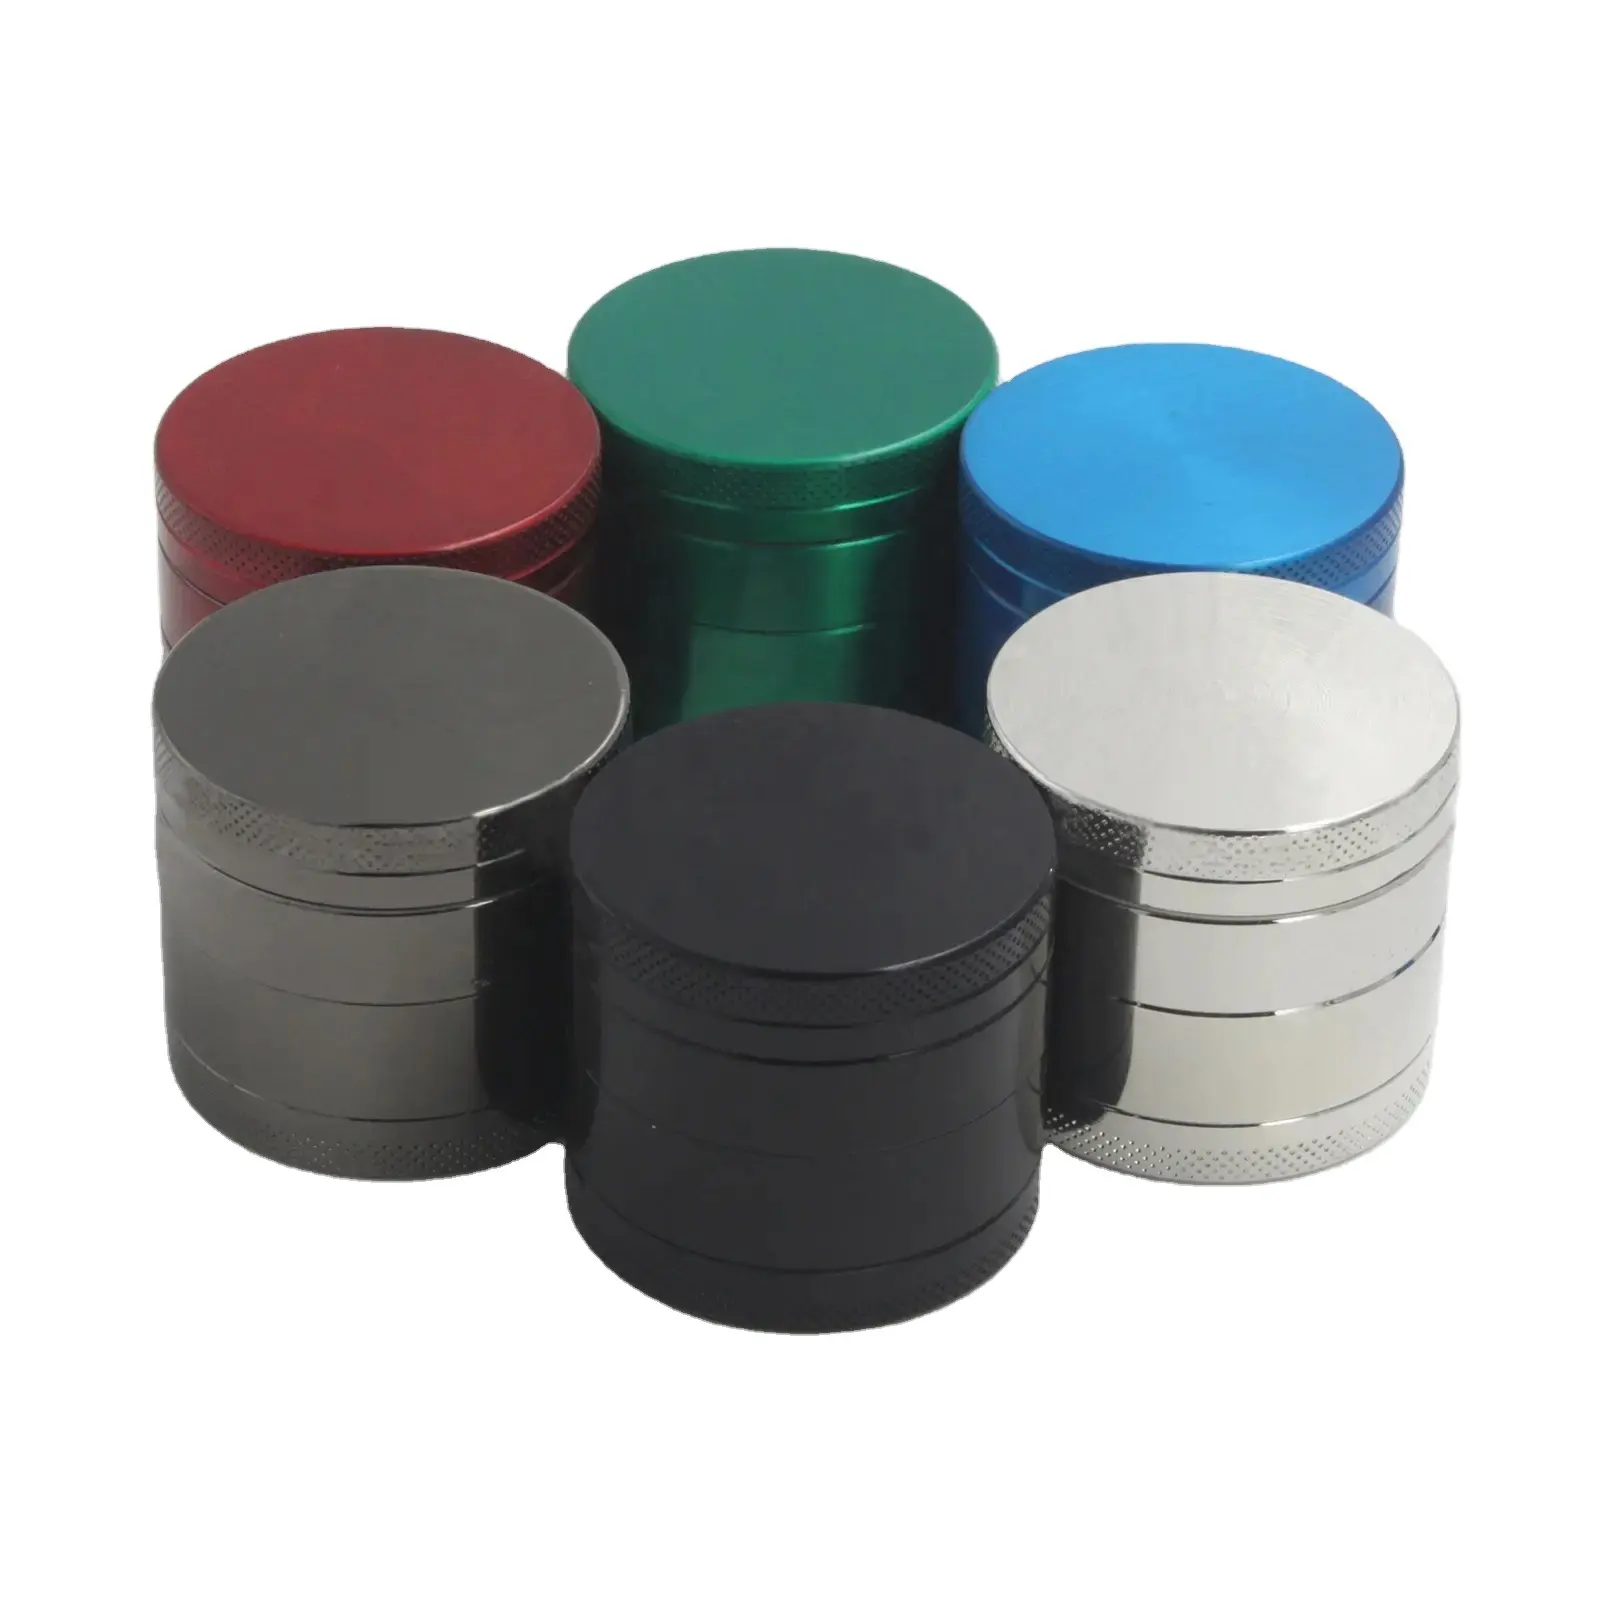 2020 New Trendy Products Metal Wood Custom Logo Herb Grinder Card Interesting Products From China